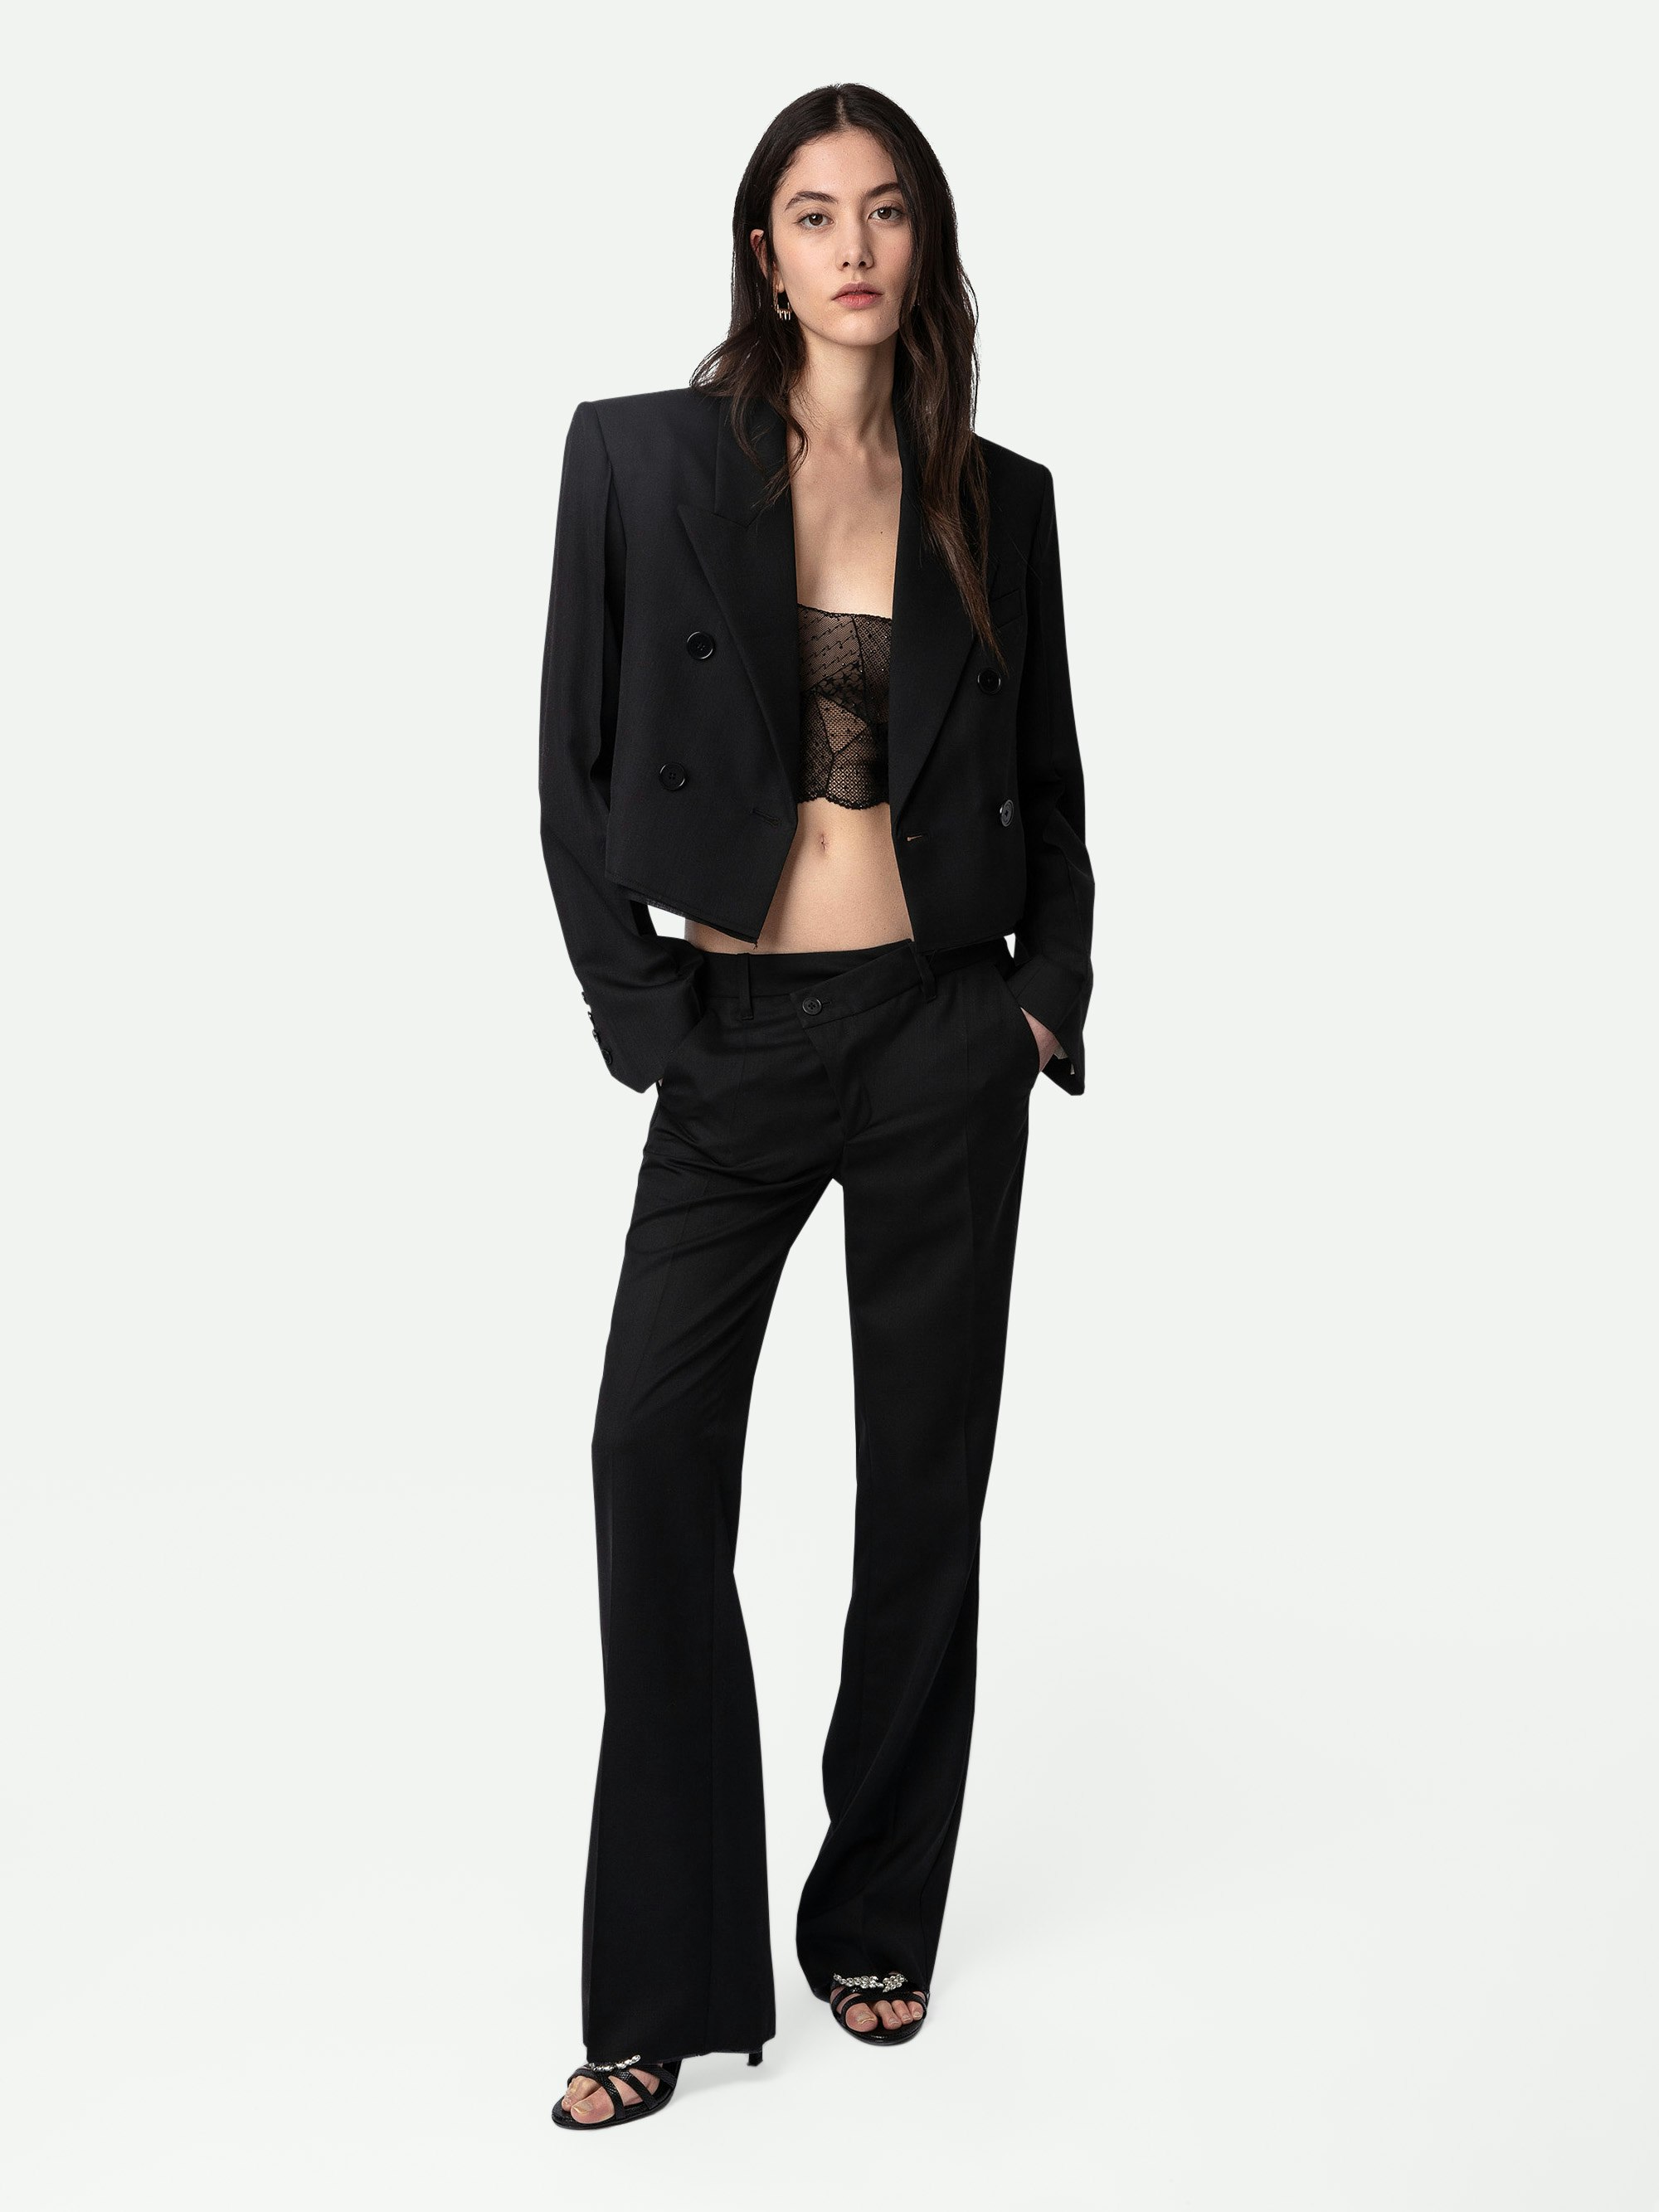 Poxy Pants - Black cool wool loose-fitting tailored pants with asymmetric fly and raw details.